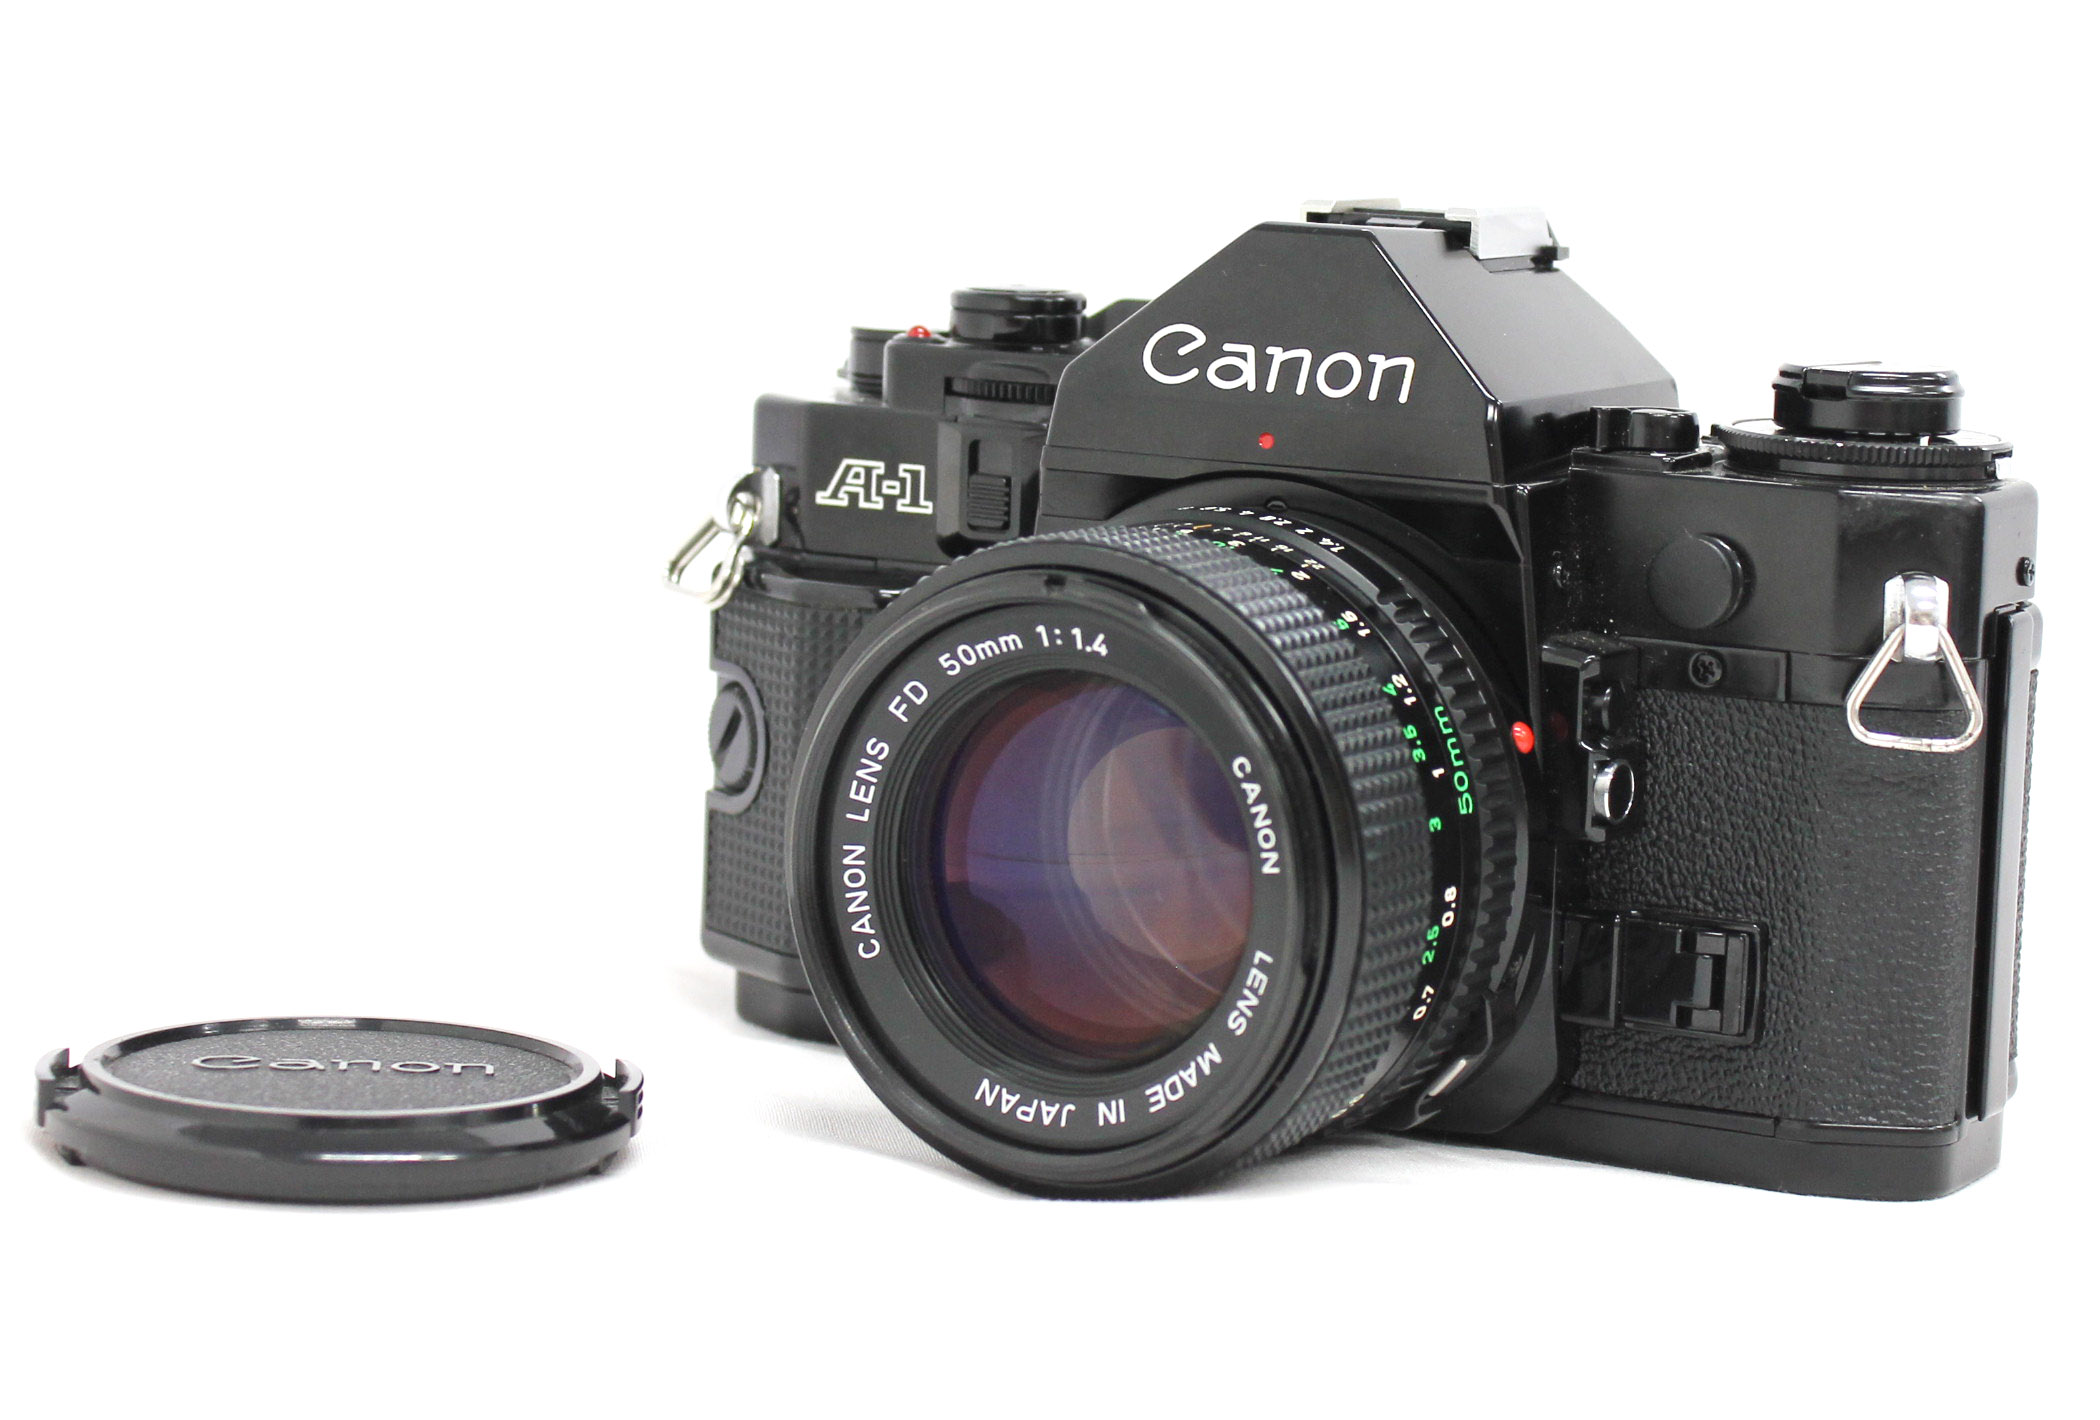 Japan Used Camera Shop | [Excellent+++++] Canon A-1 35mm SLR Film Camera with New FD NFD 50mm F/1.4 Lens from Japan